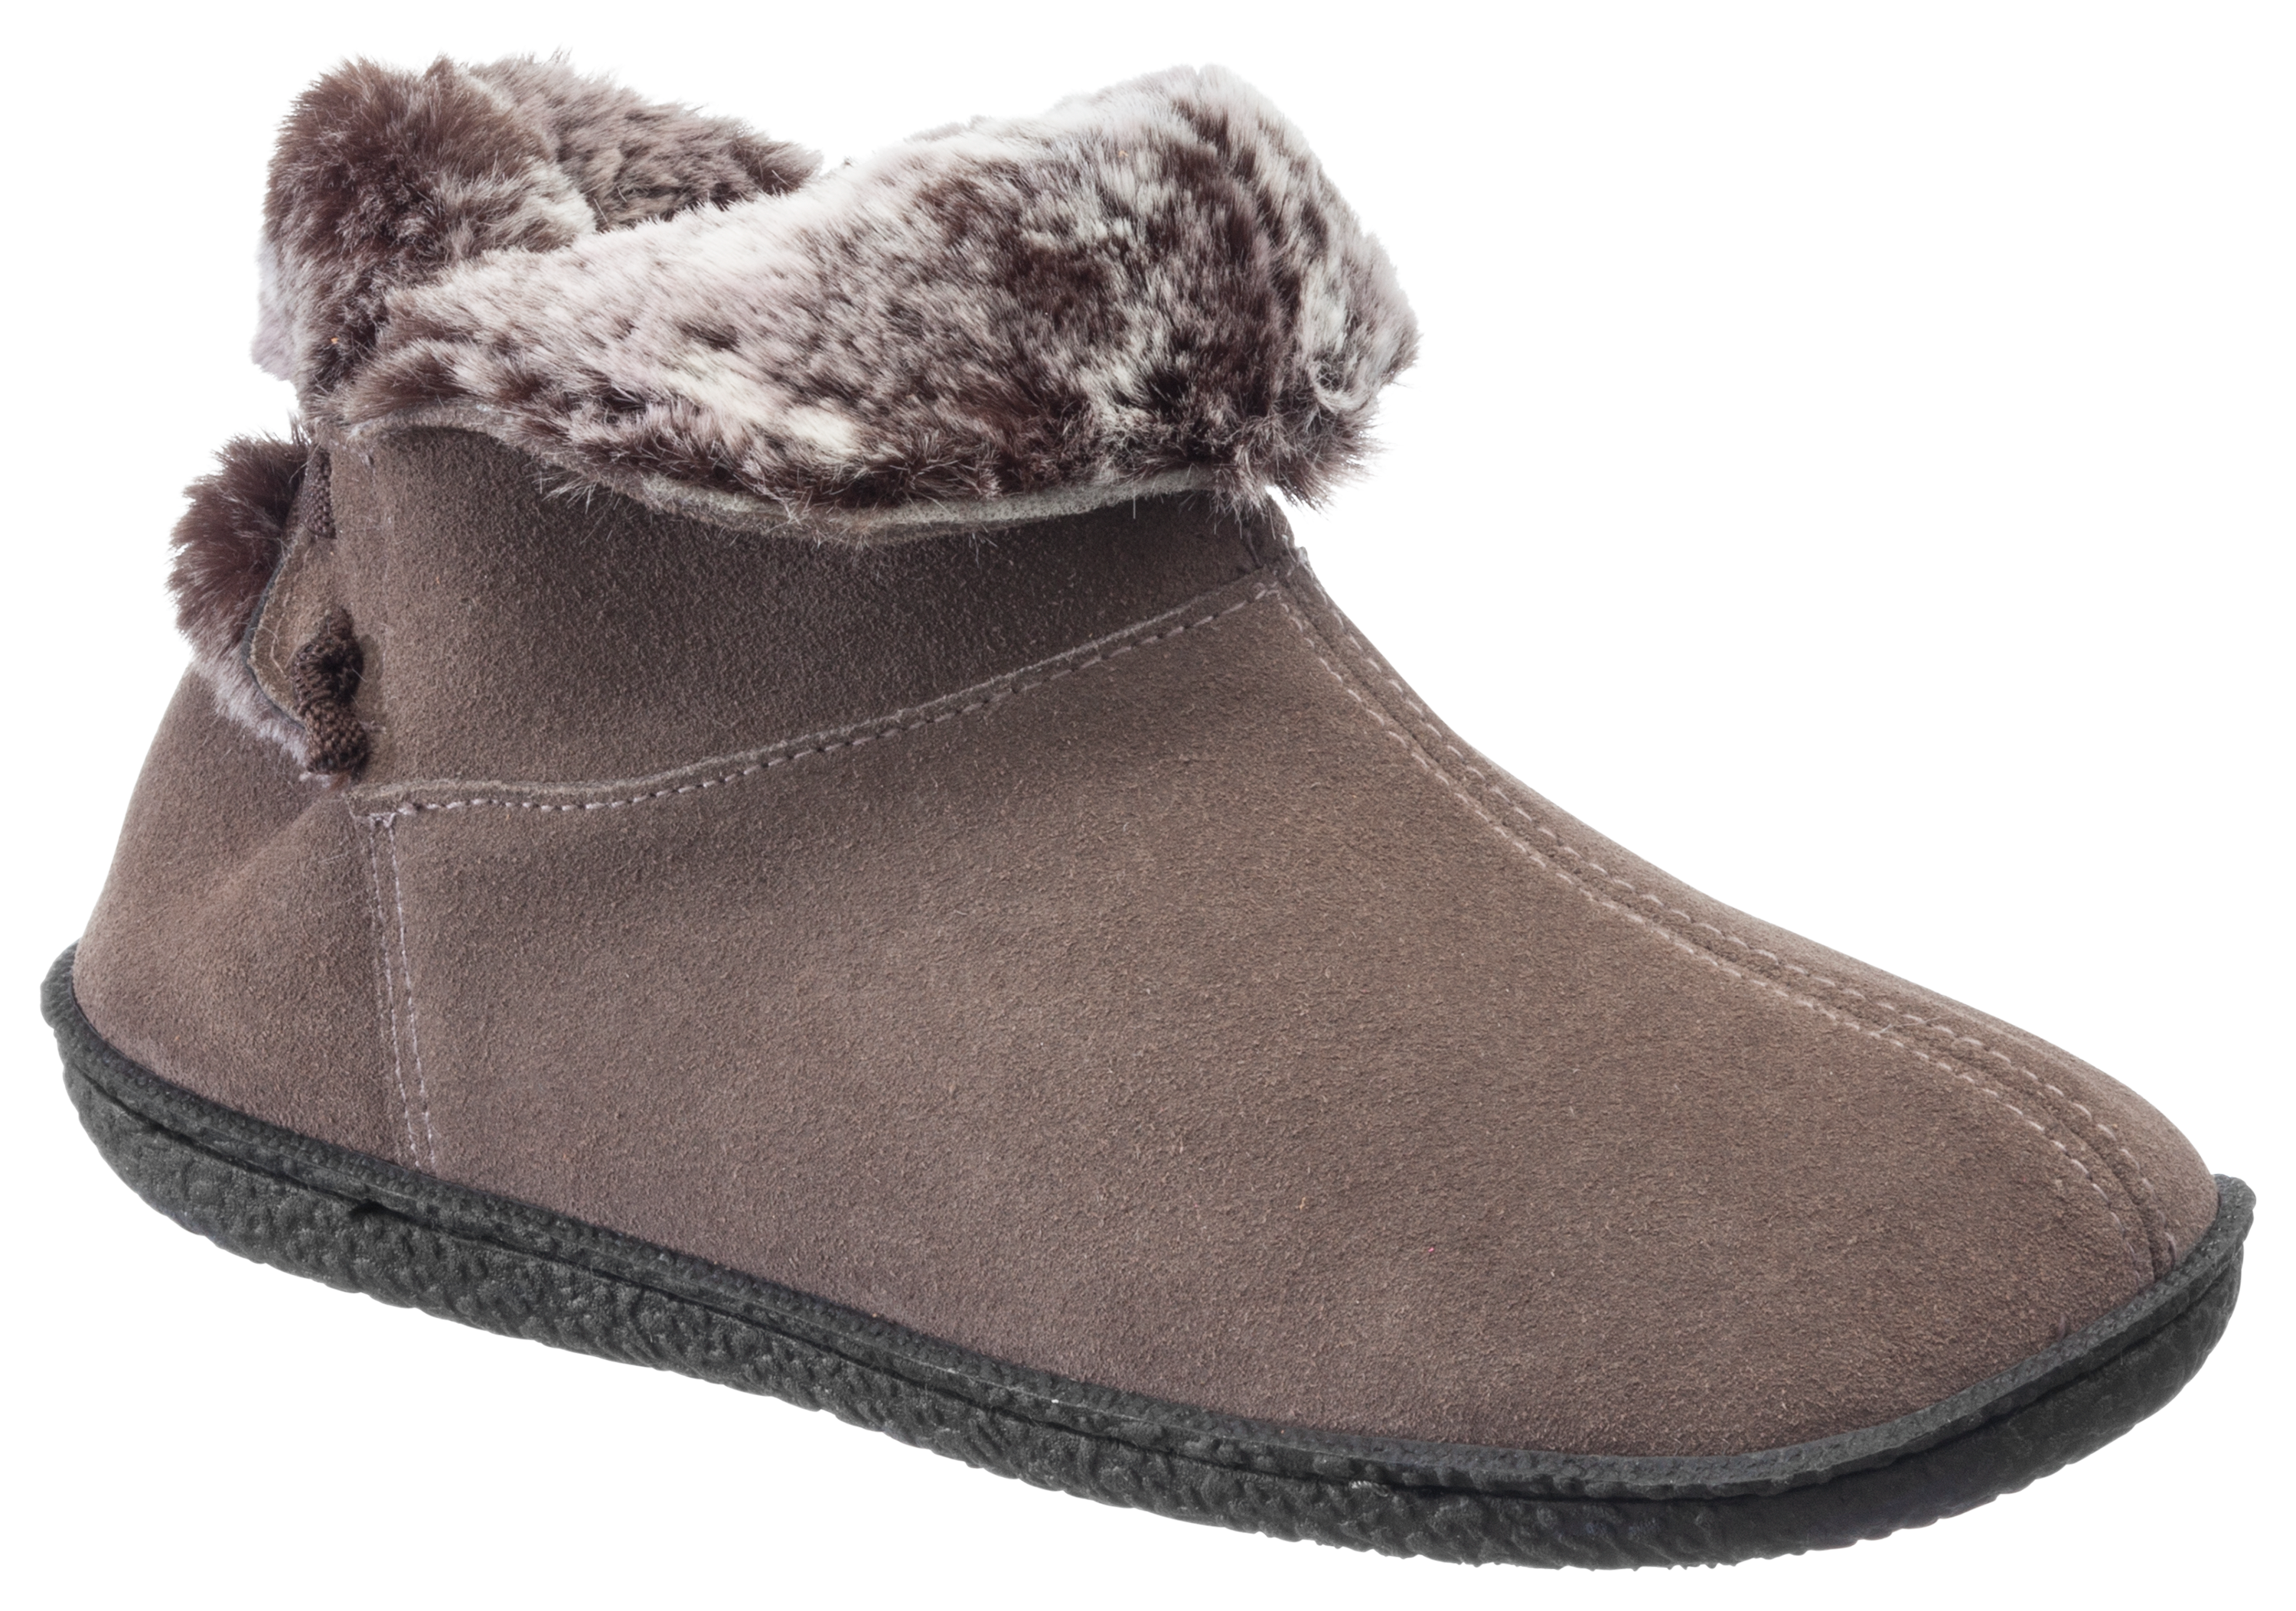 Natural Reflections Gore Bootie Ankle Boots for Ladies - Gray - 10M